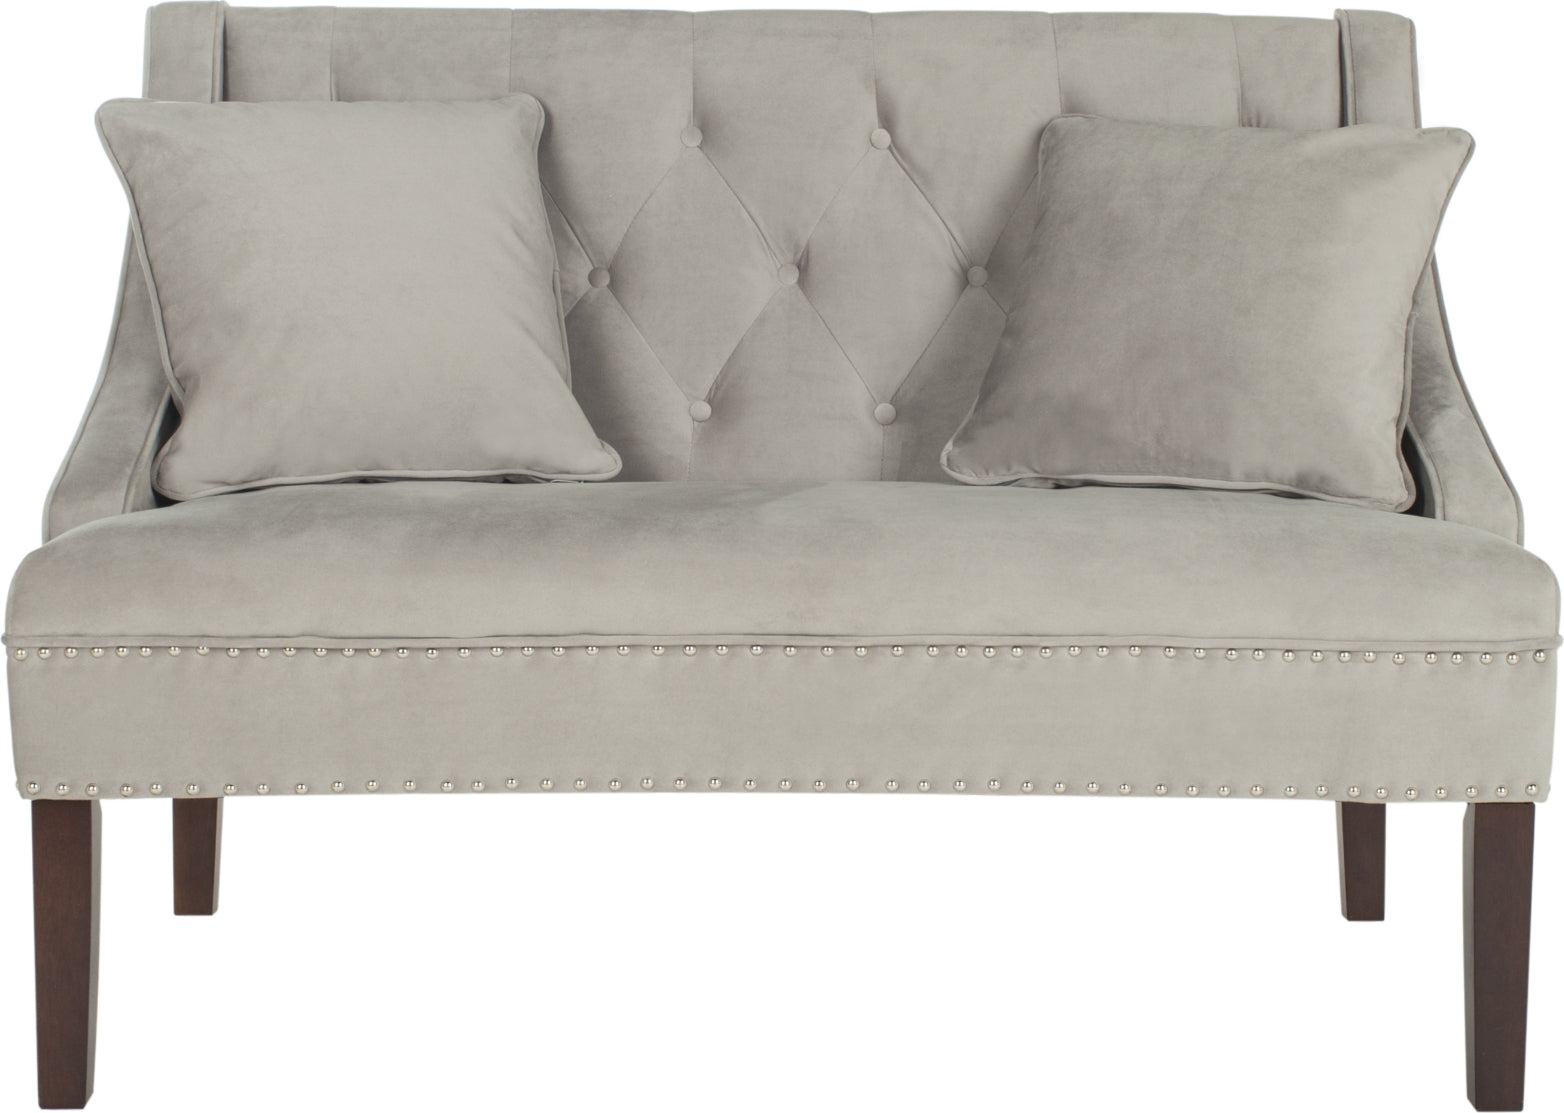 Safavieh Zoey Velvet Settee With Silver Nailheads Grey and Espresso Furniture main image